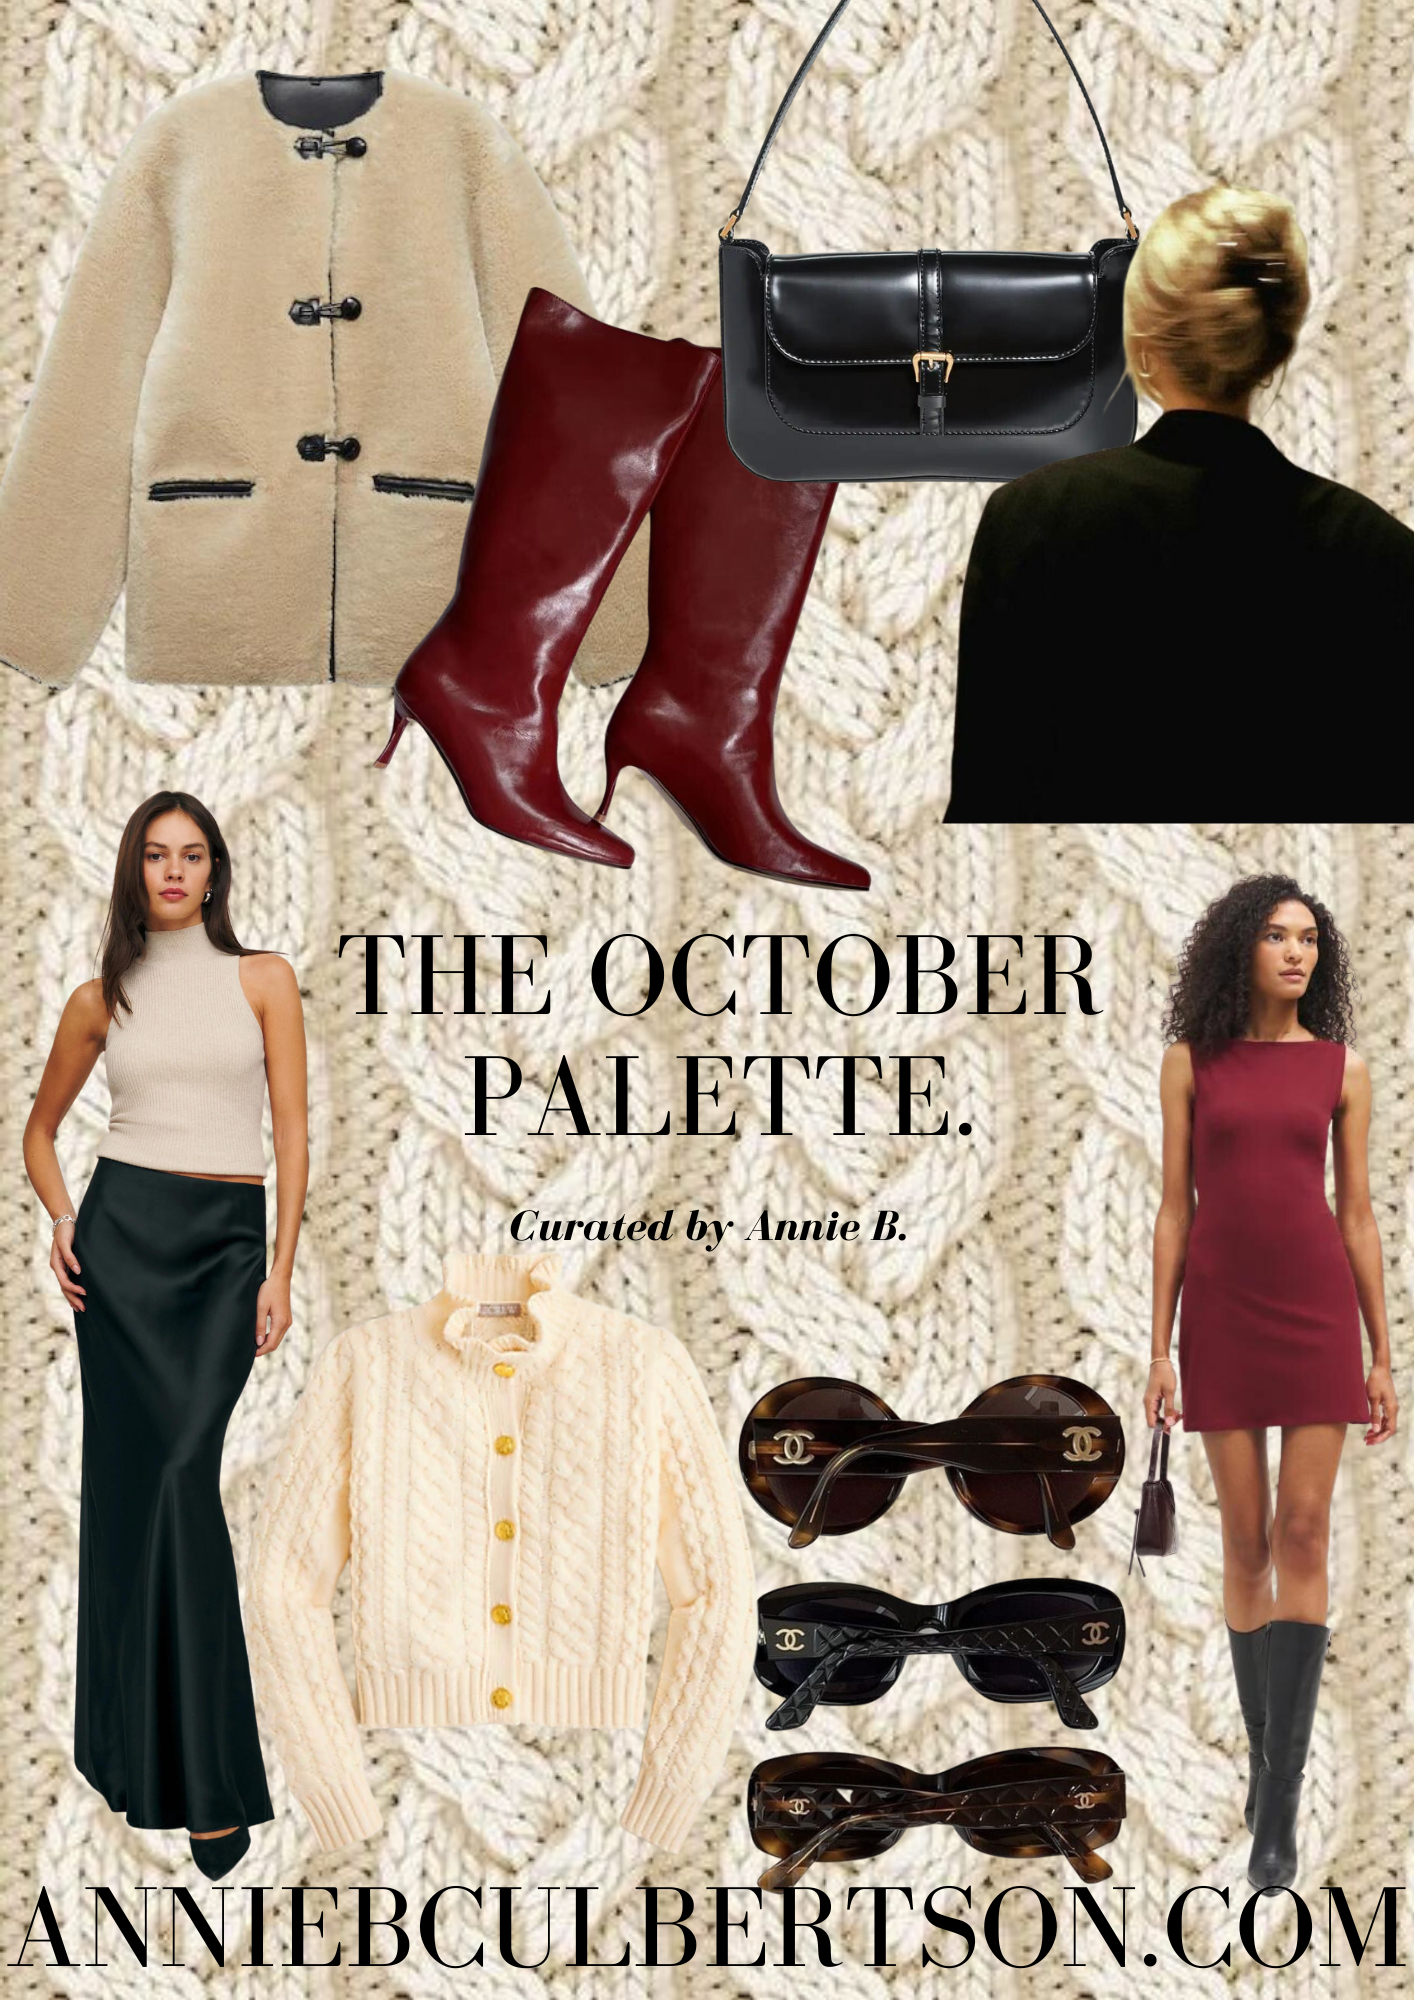 The October Palette.